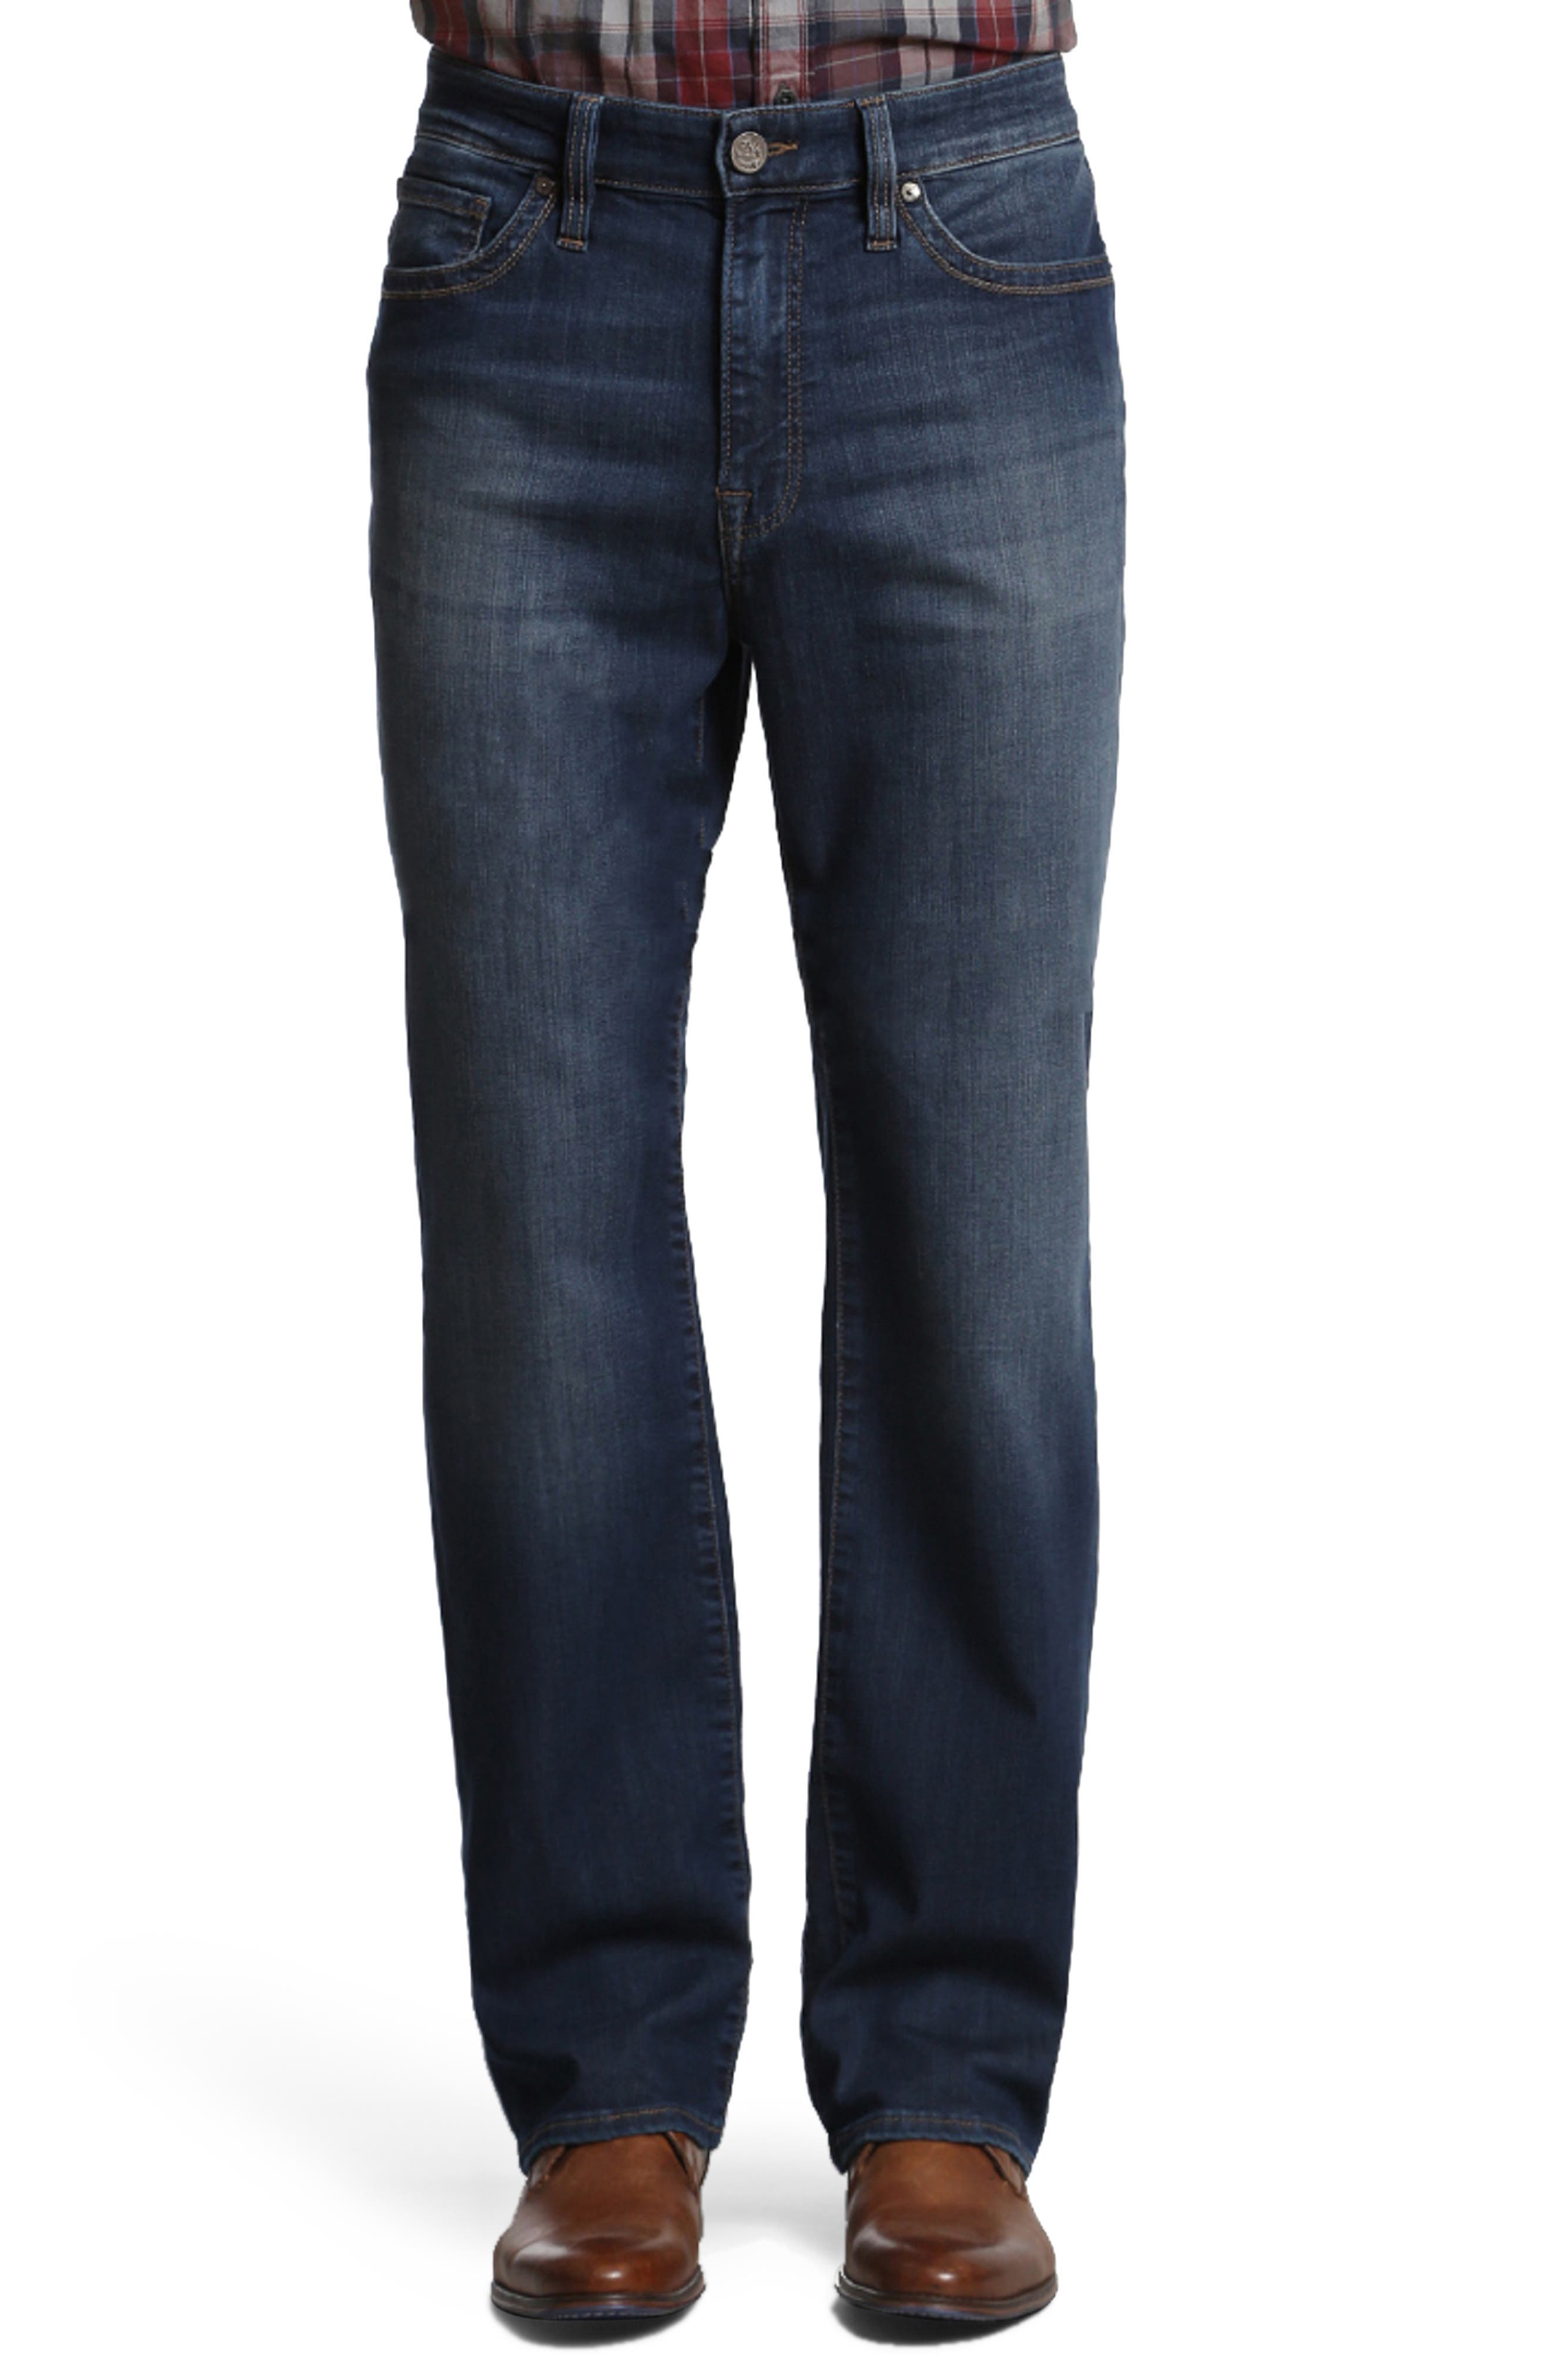 Men's Jeans 34 Heritage Clothing 